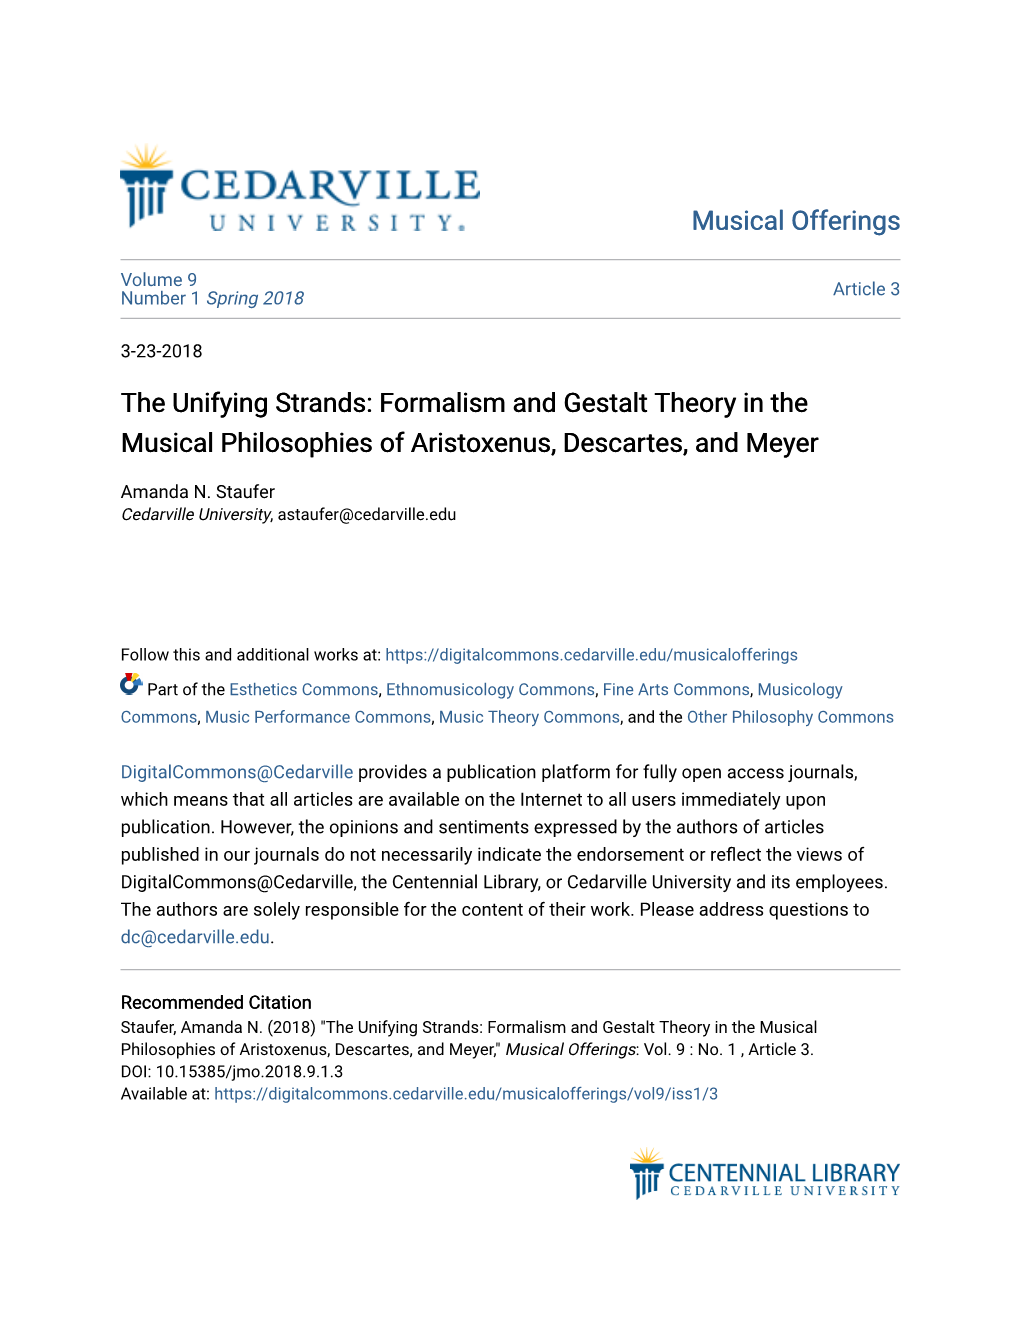 The Unifying Strands: Formalism and Gestalt Theory in the Musical Philosophies of Aristoxenus, Descartes, and Meyer